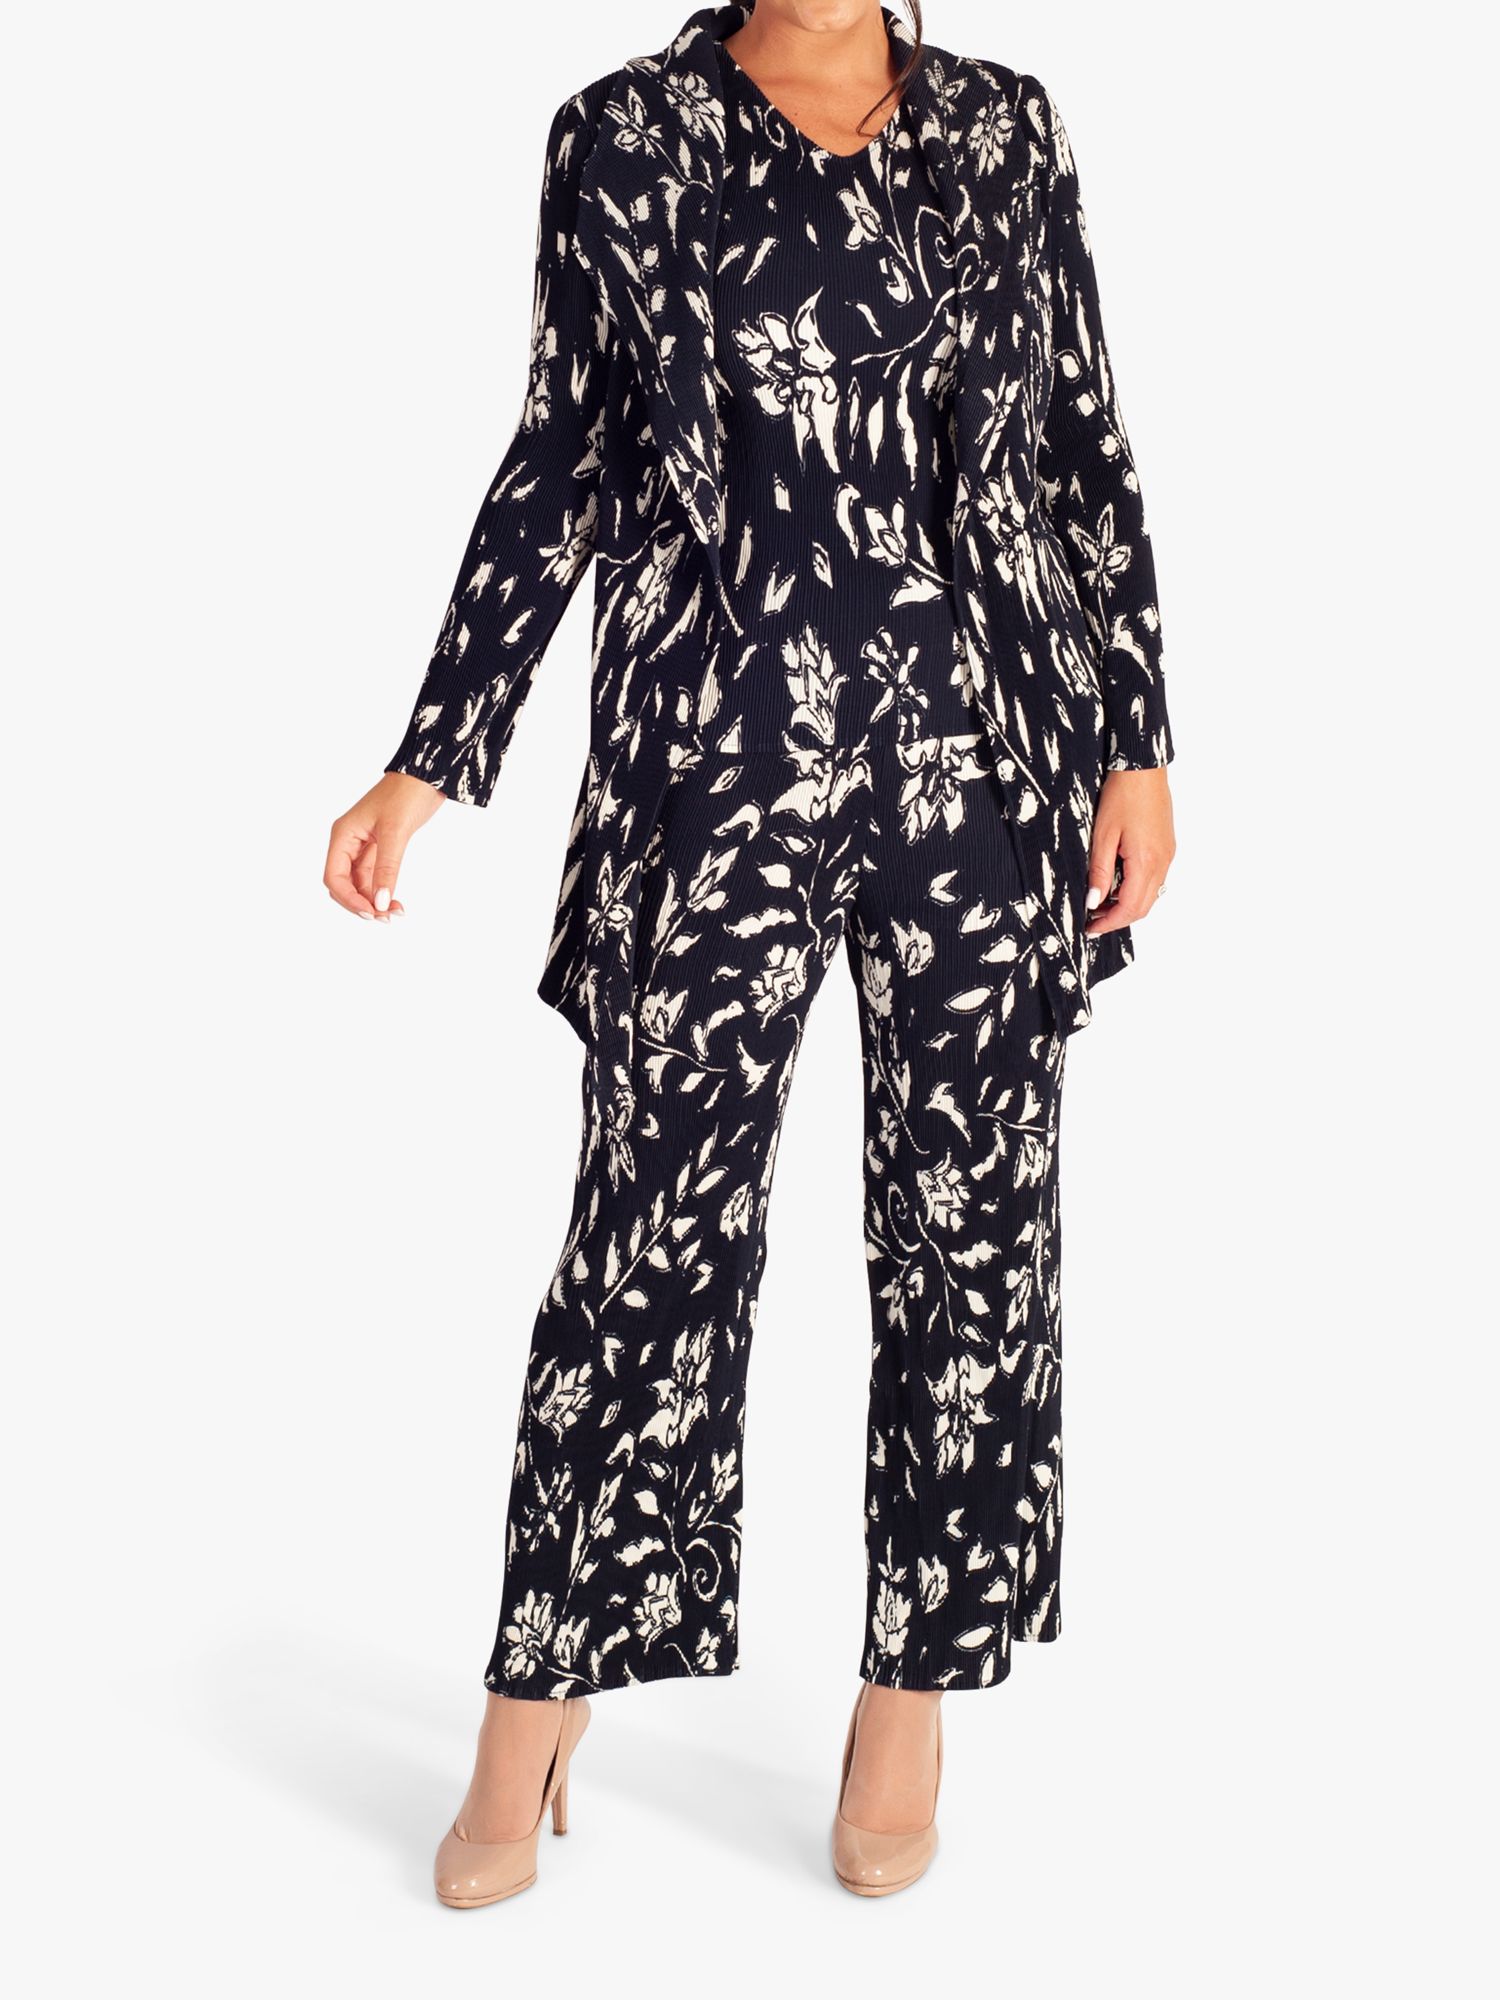 Buy chesca Floral Waterfall Jacket, Navy/Ivory Online at johnlewis.com